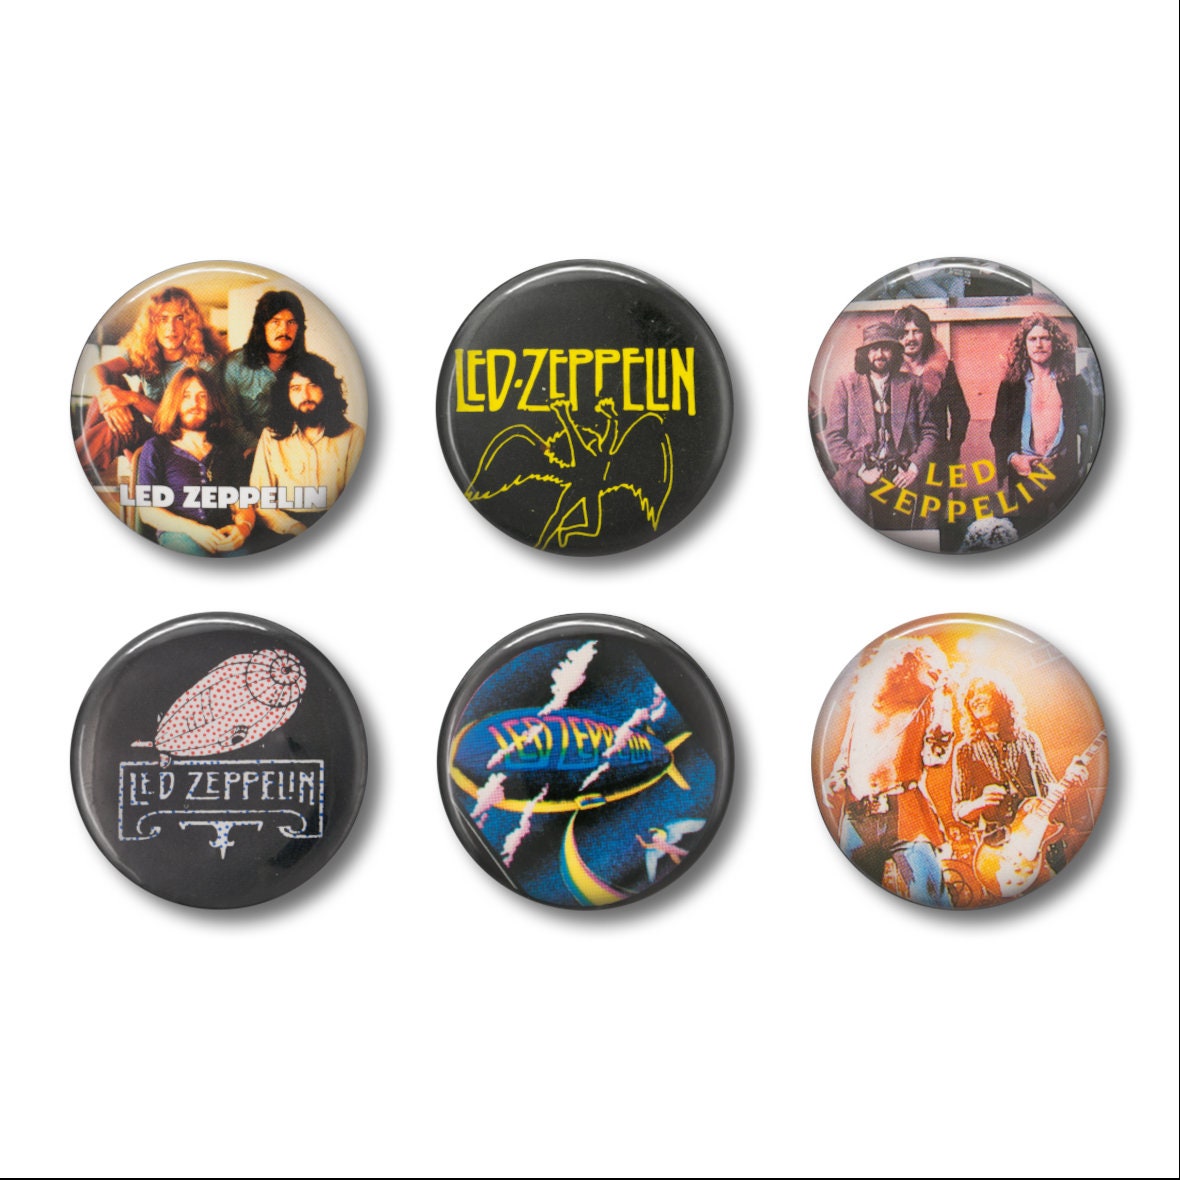 Vintage Style Led Zeppelin Band Pin or Magnet Set of 6 - Rock Punk Metal  Pin -Music Pins -Music Badges - Band Buttons